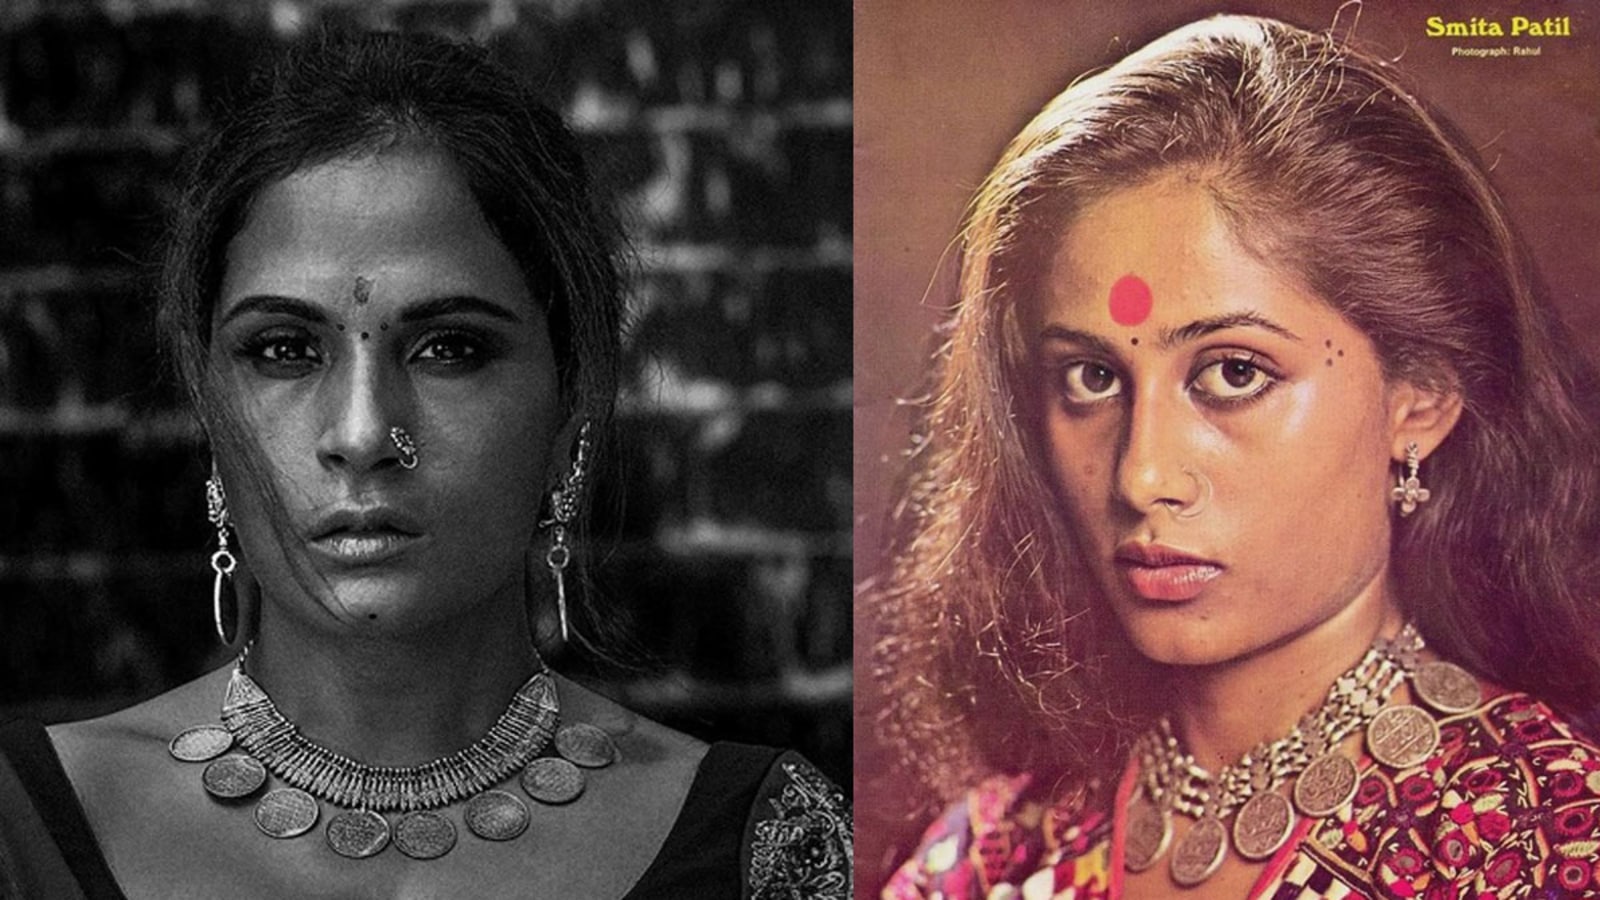 Richa Chadha pays tribute to Smita Patil with new pic, her son Prateik Babbar reacts